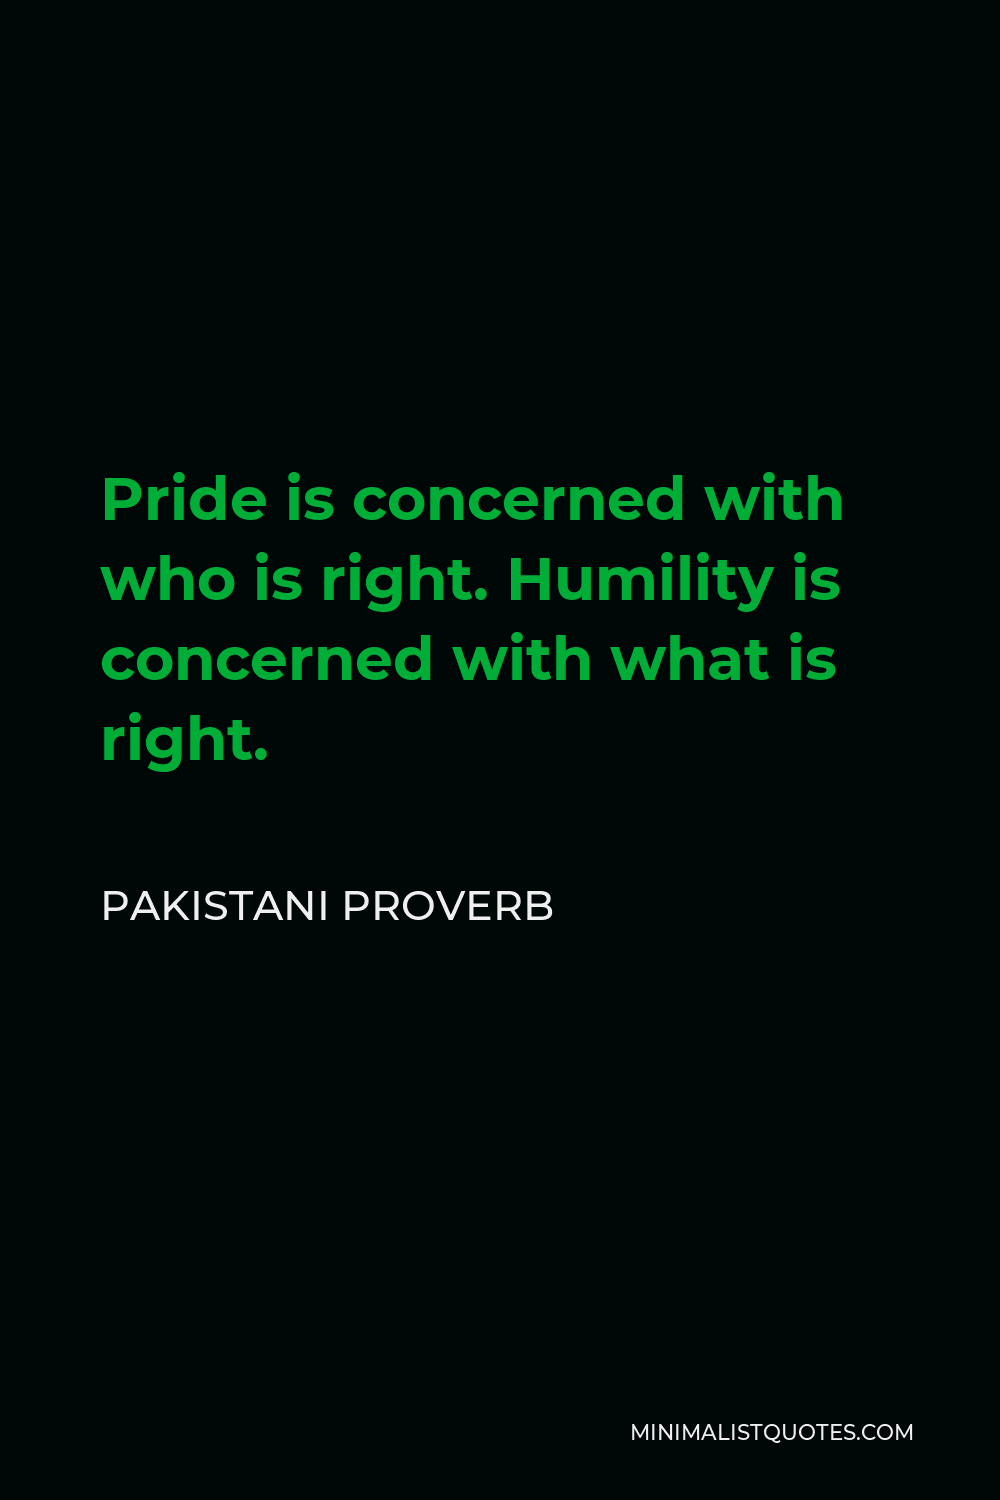 Pakistani Proverb Quote - Pride is concerned with who is right. Humility is concerned with what is right.